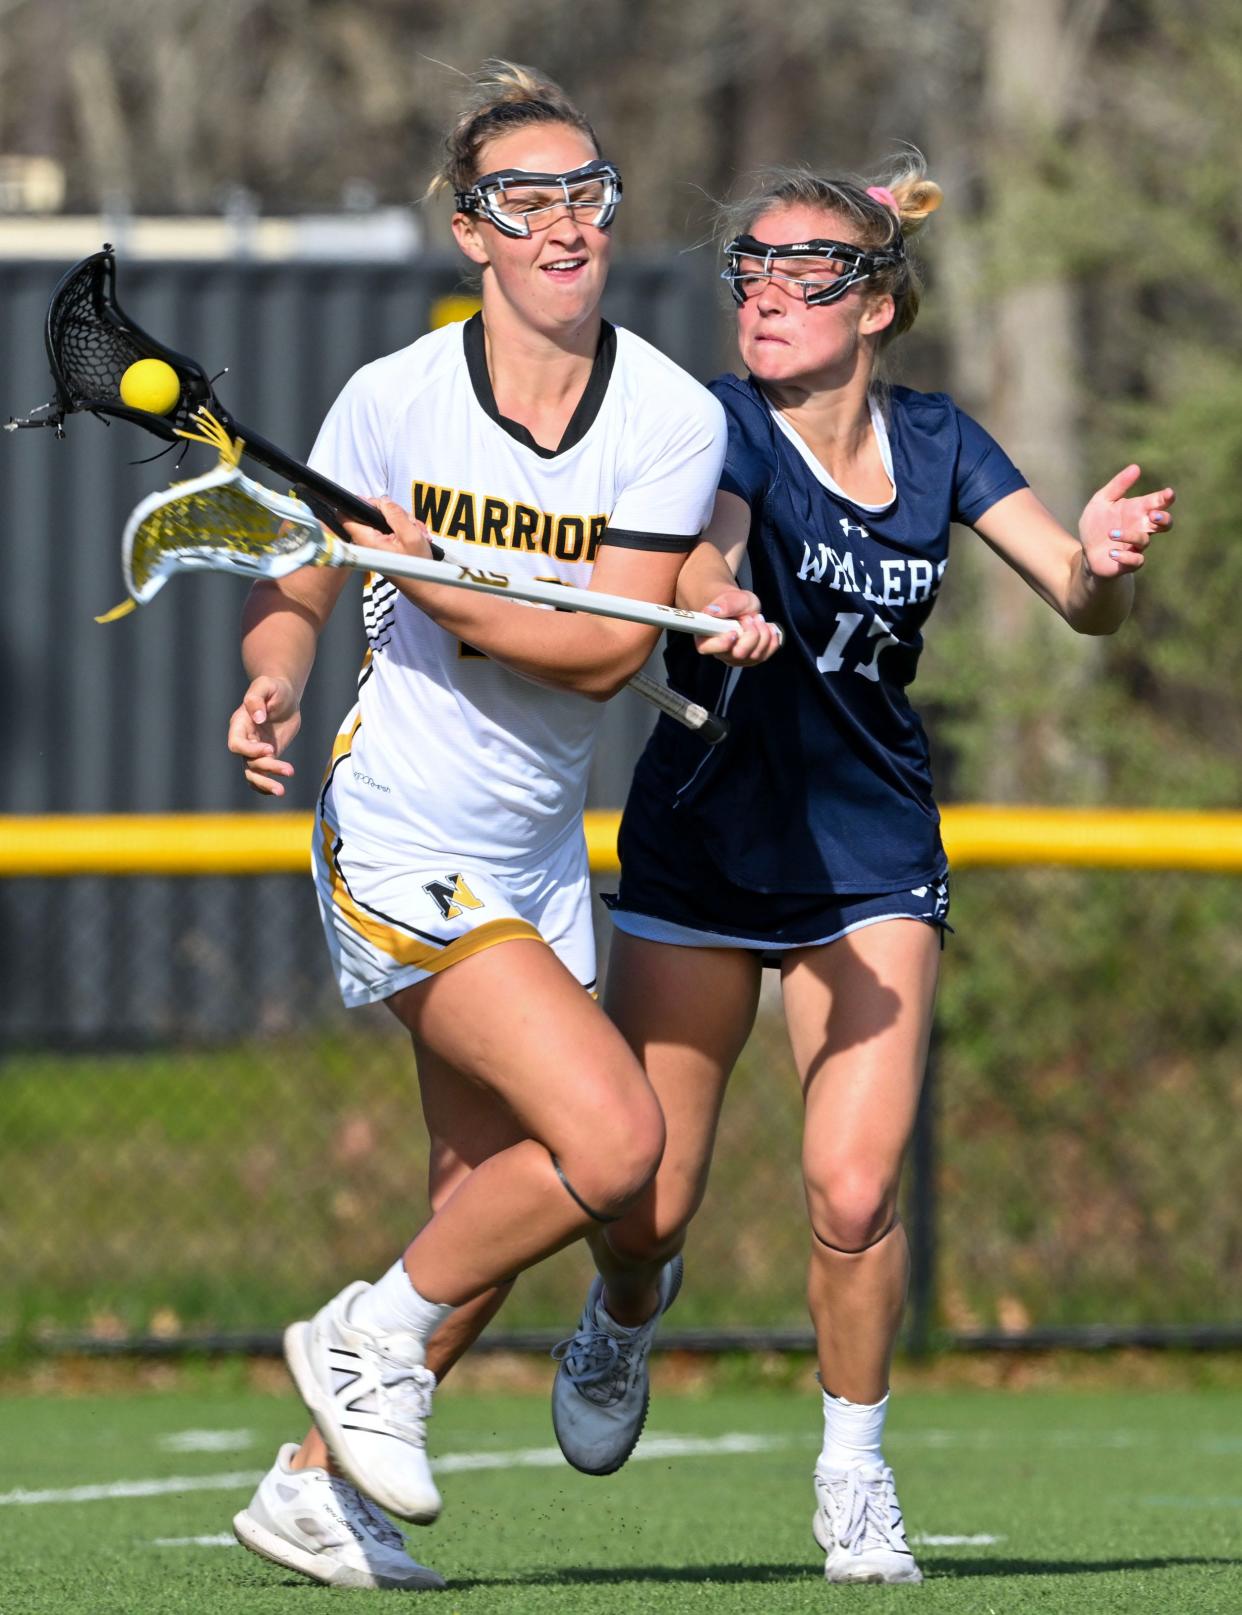 Bailey Lower of Nantucket attempts to stop a drive by Sienna Reeves of Nauset.